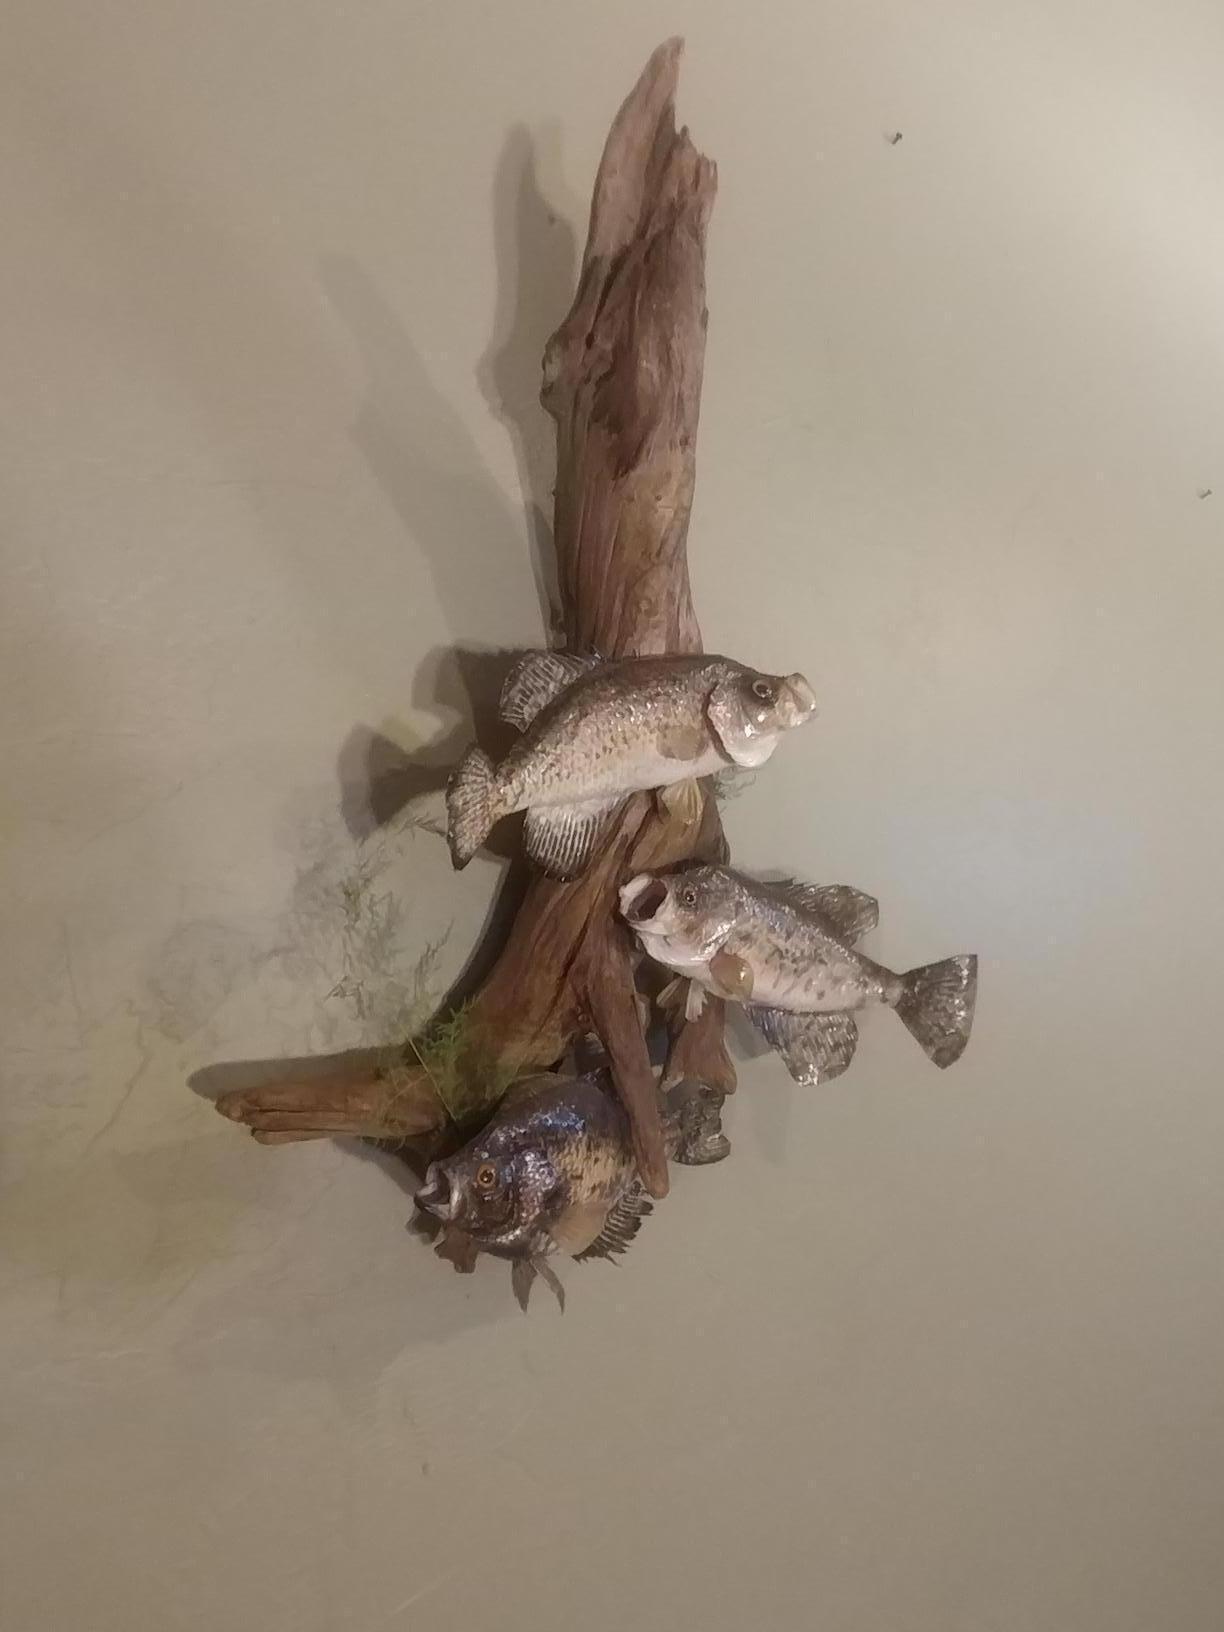 Real Skin Fish Mount 3 Black Crappie On Driftwood